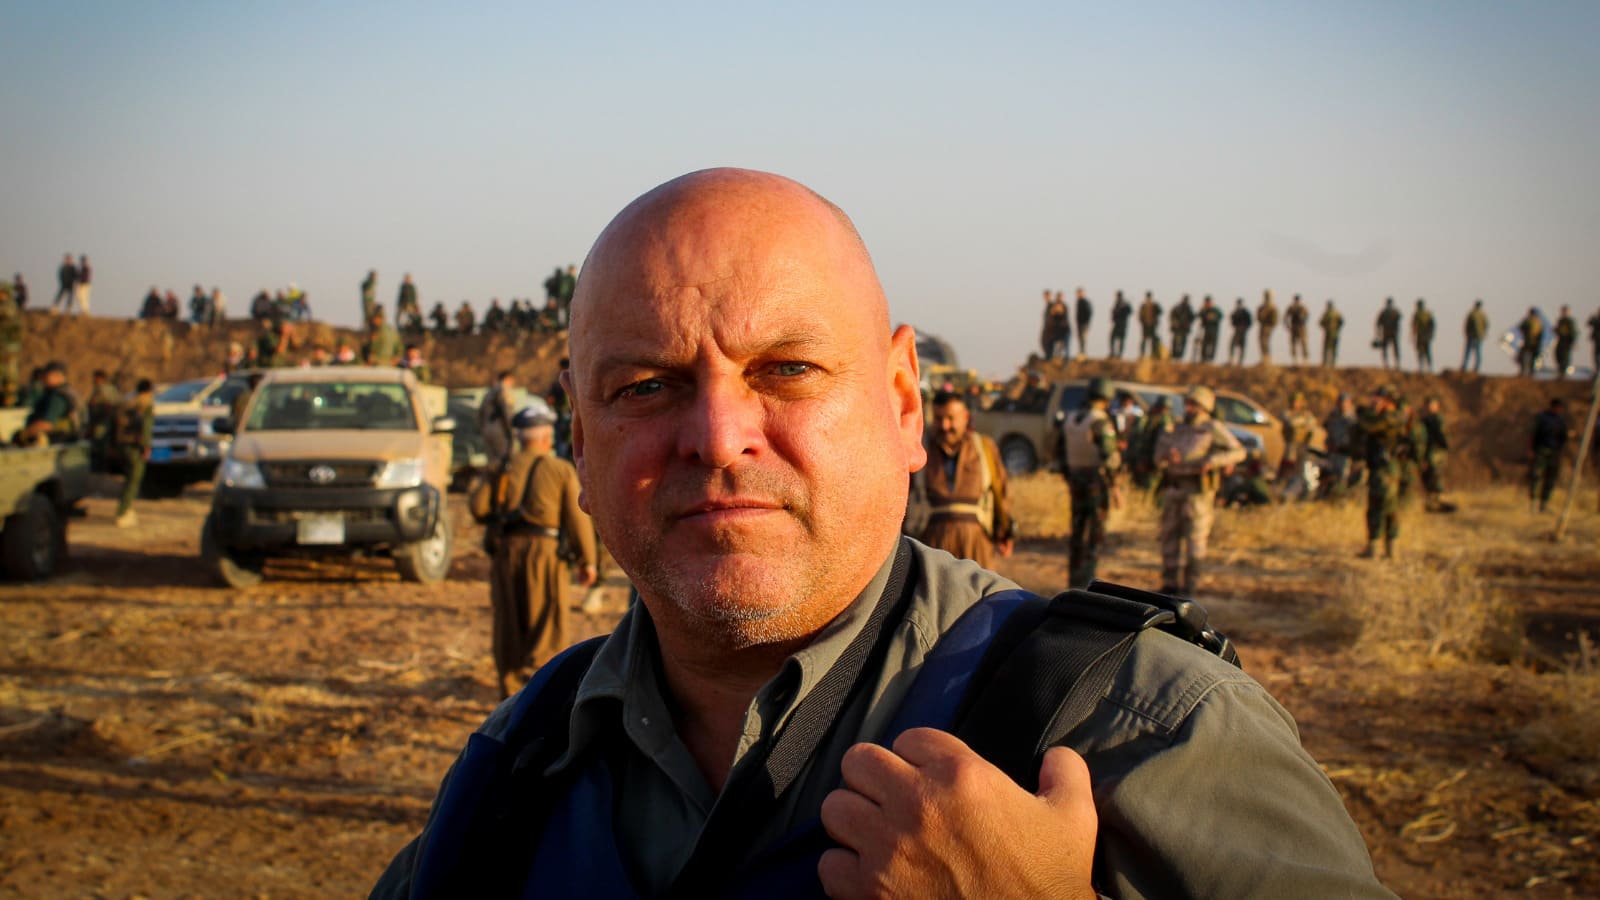 Fillmaer David Pratt looking at the camera with army troops seen in the background.